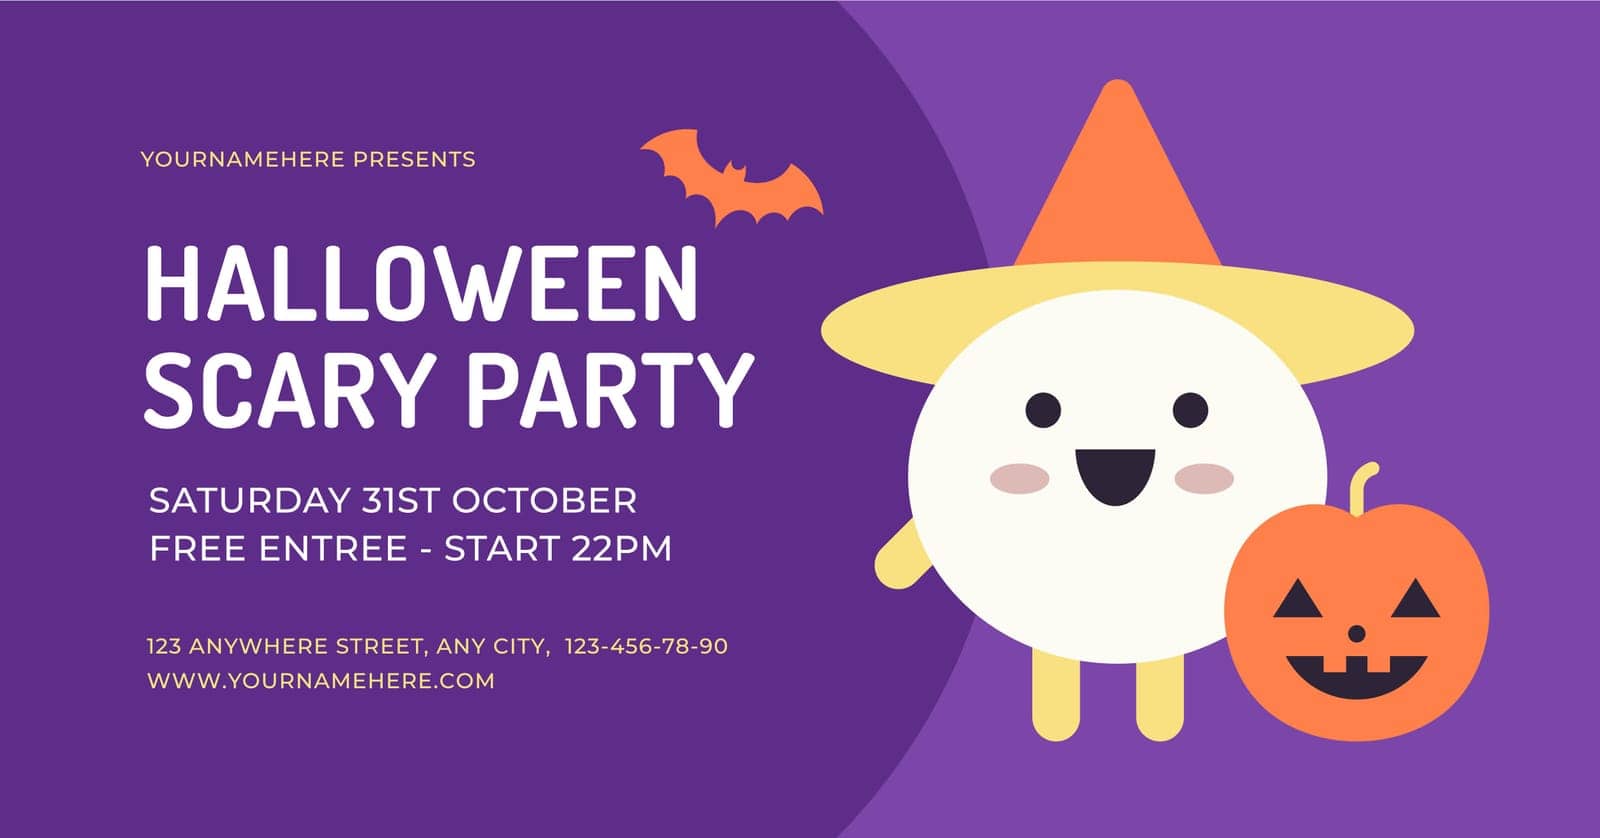 Halloween scary kids party banner with cute sorcerer and pumpkin design template vector flat illustration. Autumn holiday event celebration childish invitation with friendly creepy characters promo